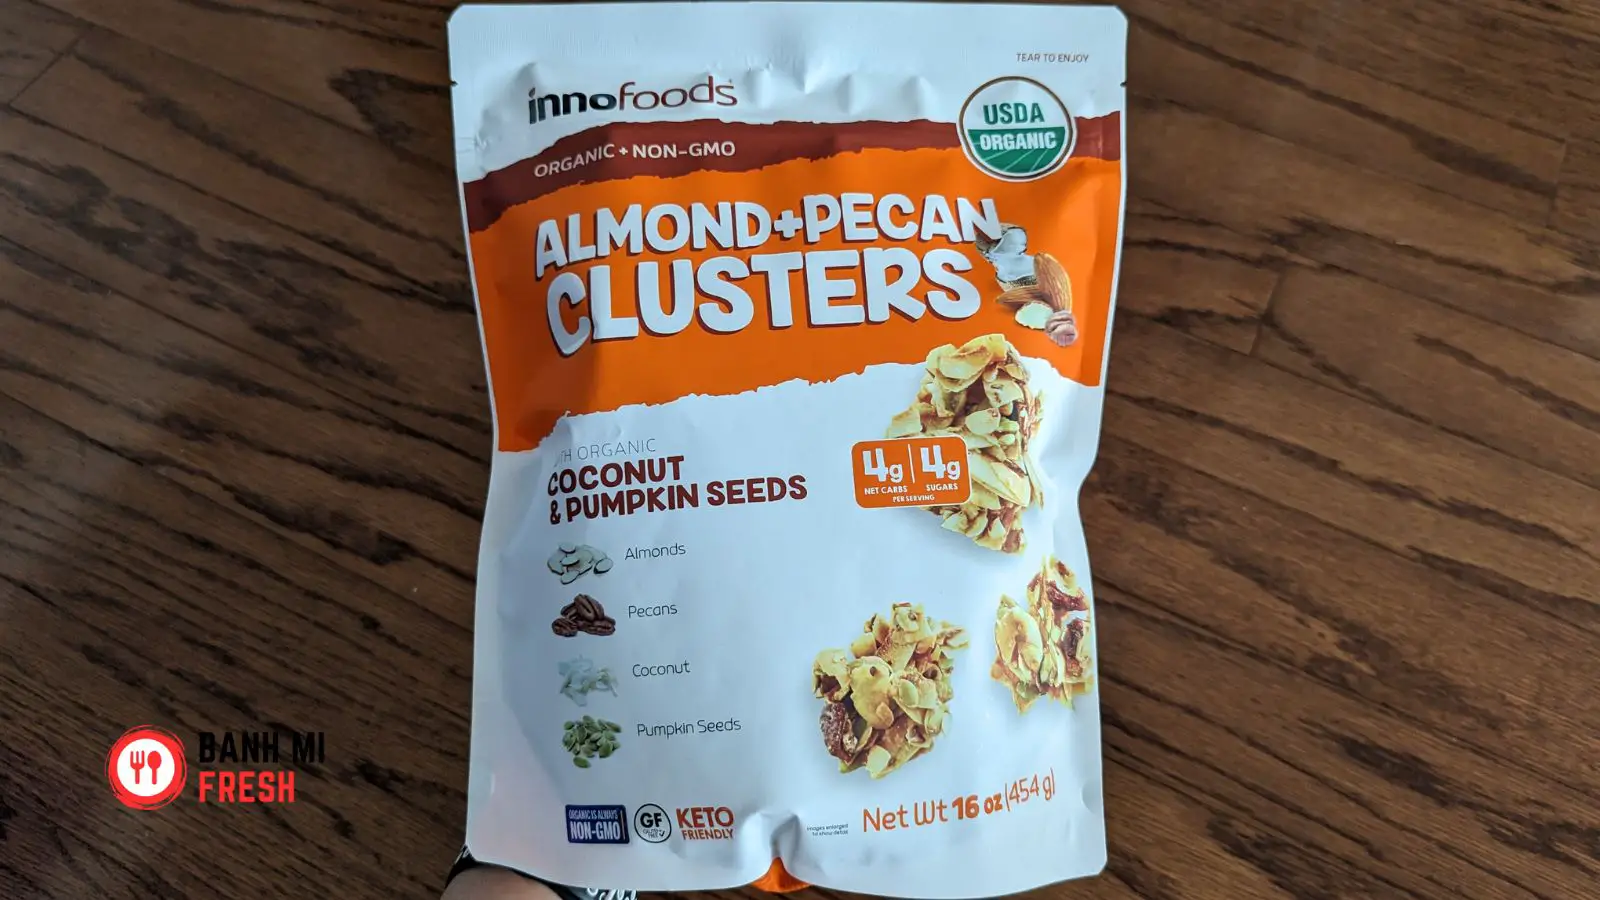 Innofoods almond + pecan clusters front package - banhmifresh.com